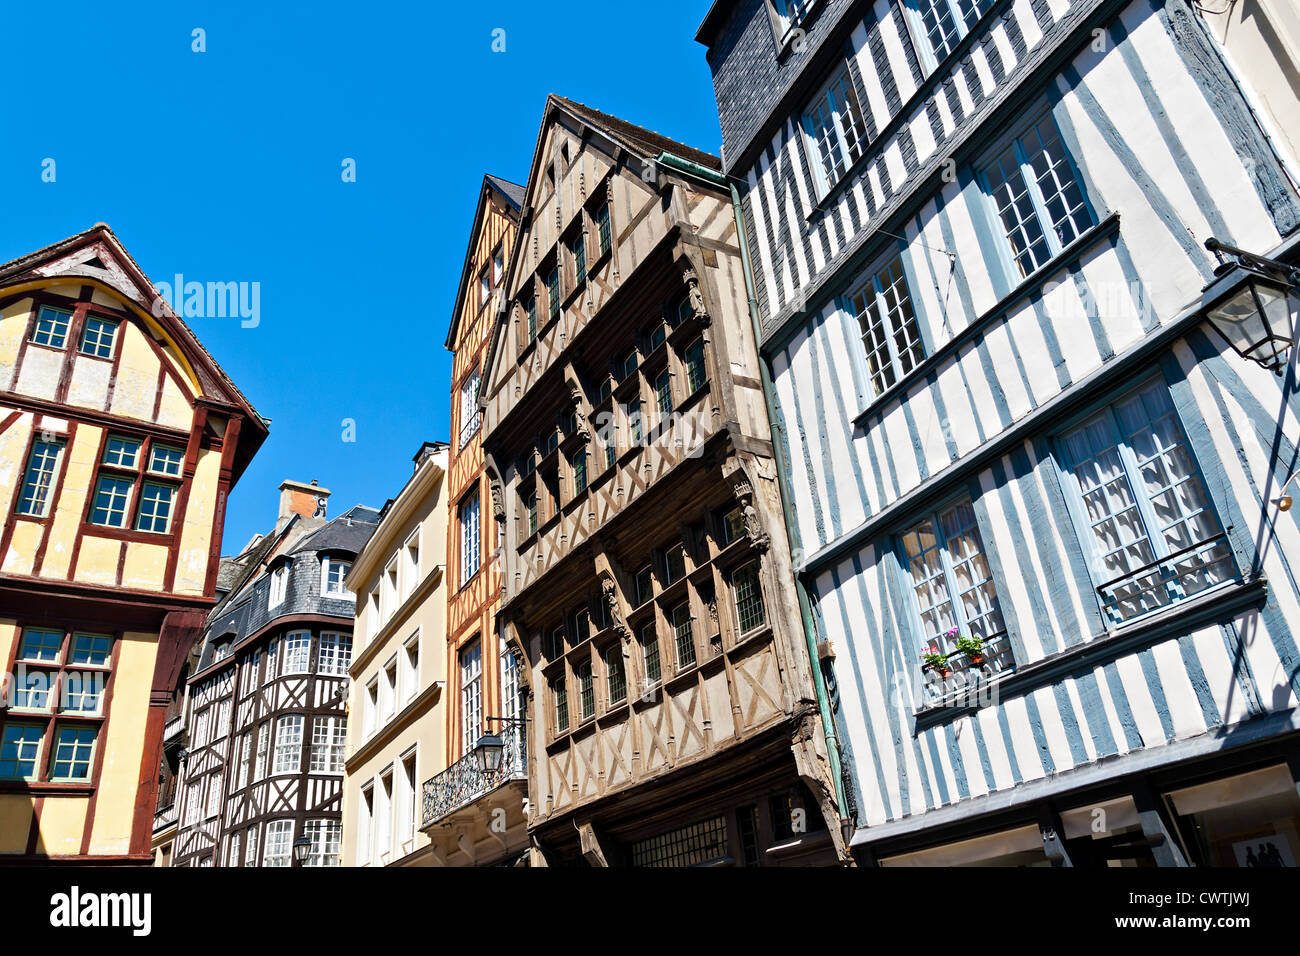 Half-Timbered Houses at Rouen, Normandy, France Stock Photo